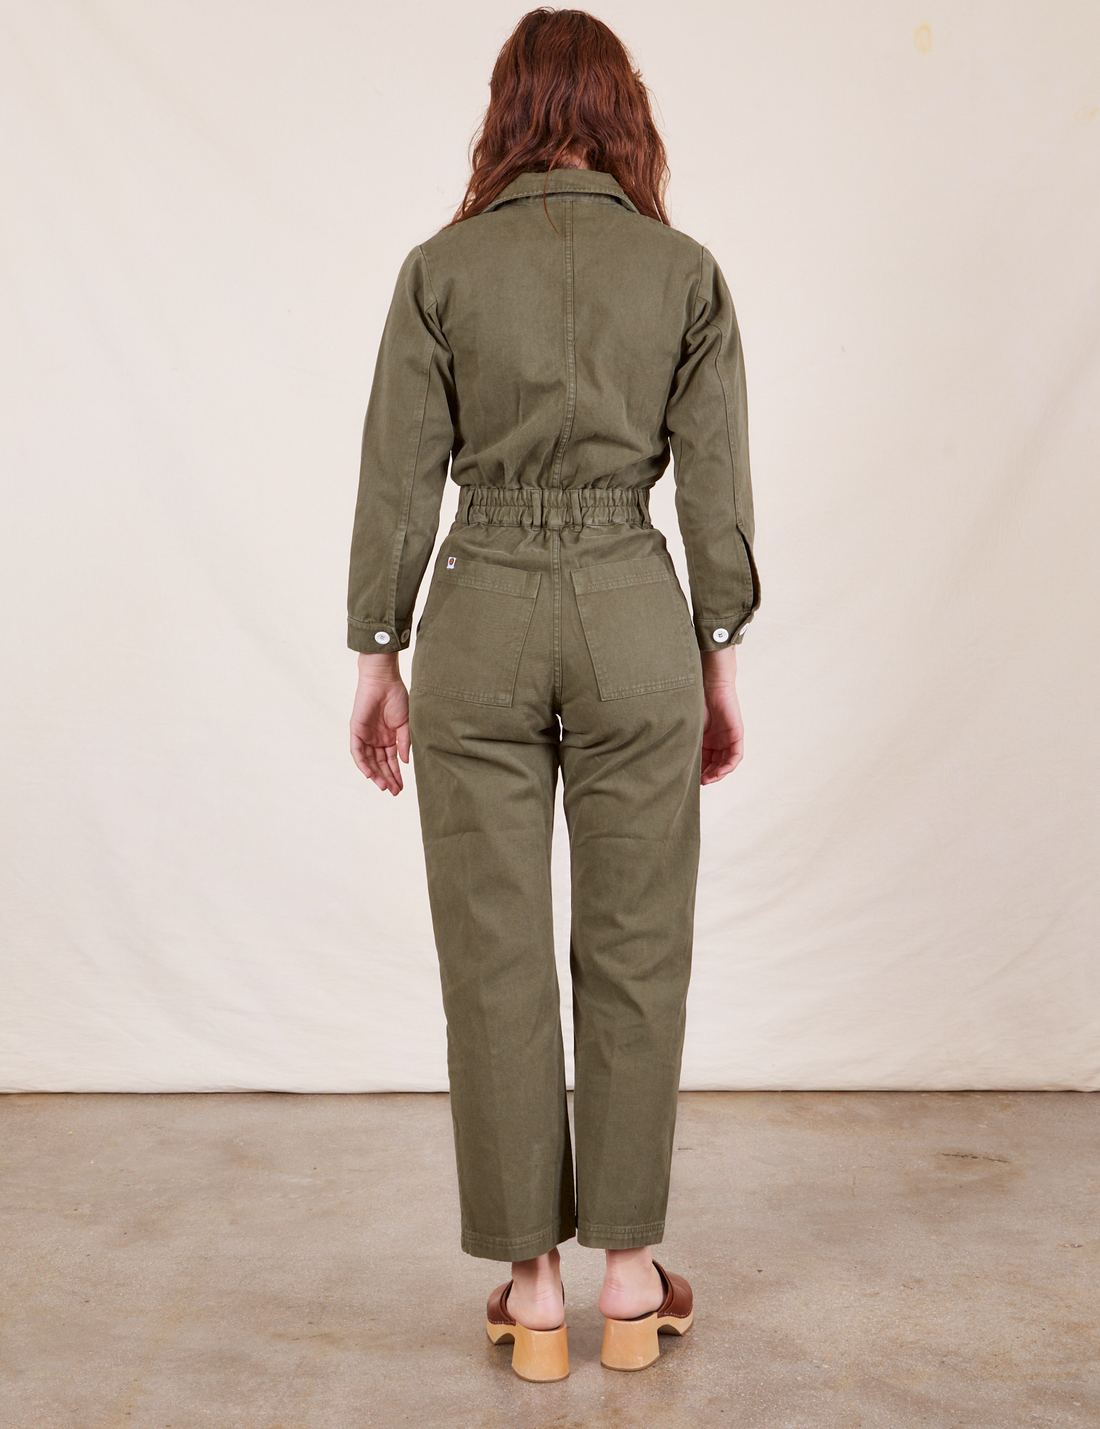 Back view of Everyday Jumpsuit in Surplus Green worn by Alex